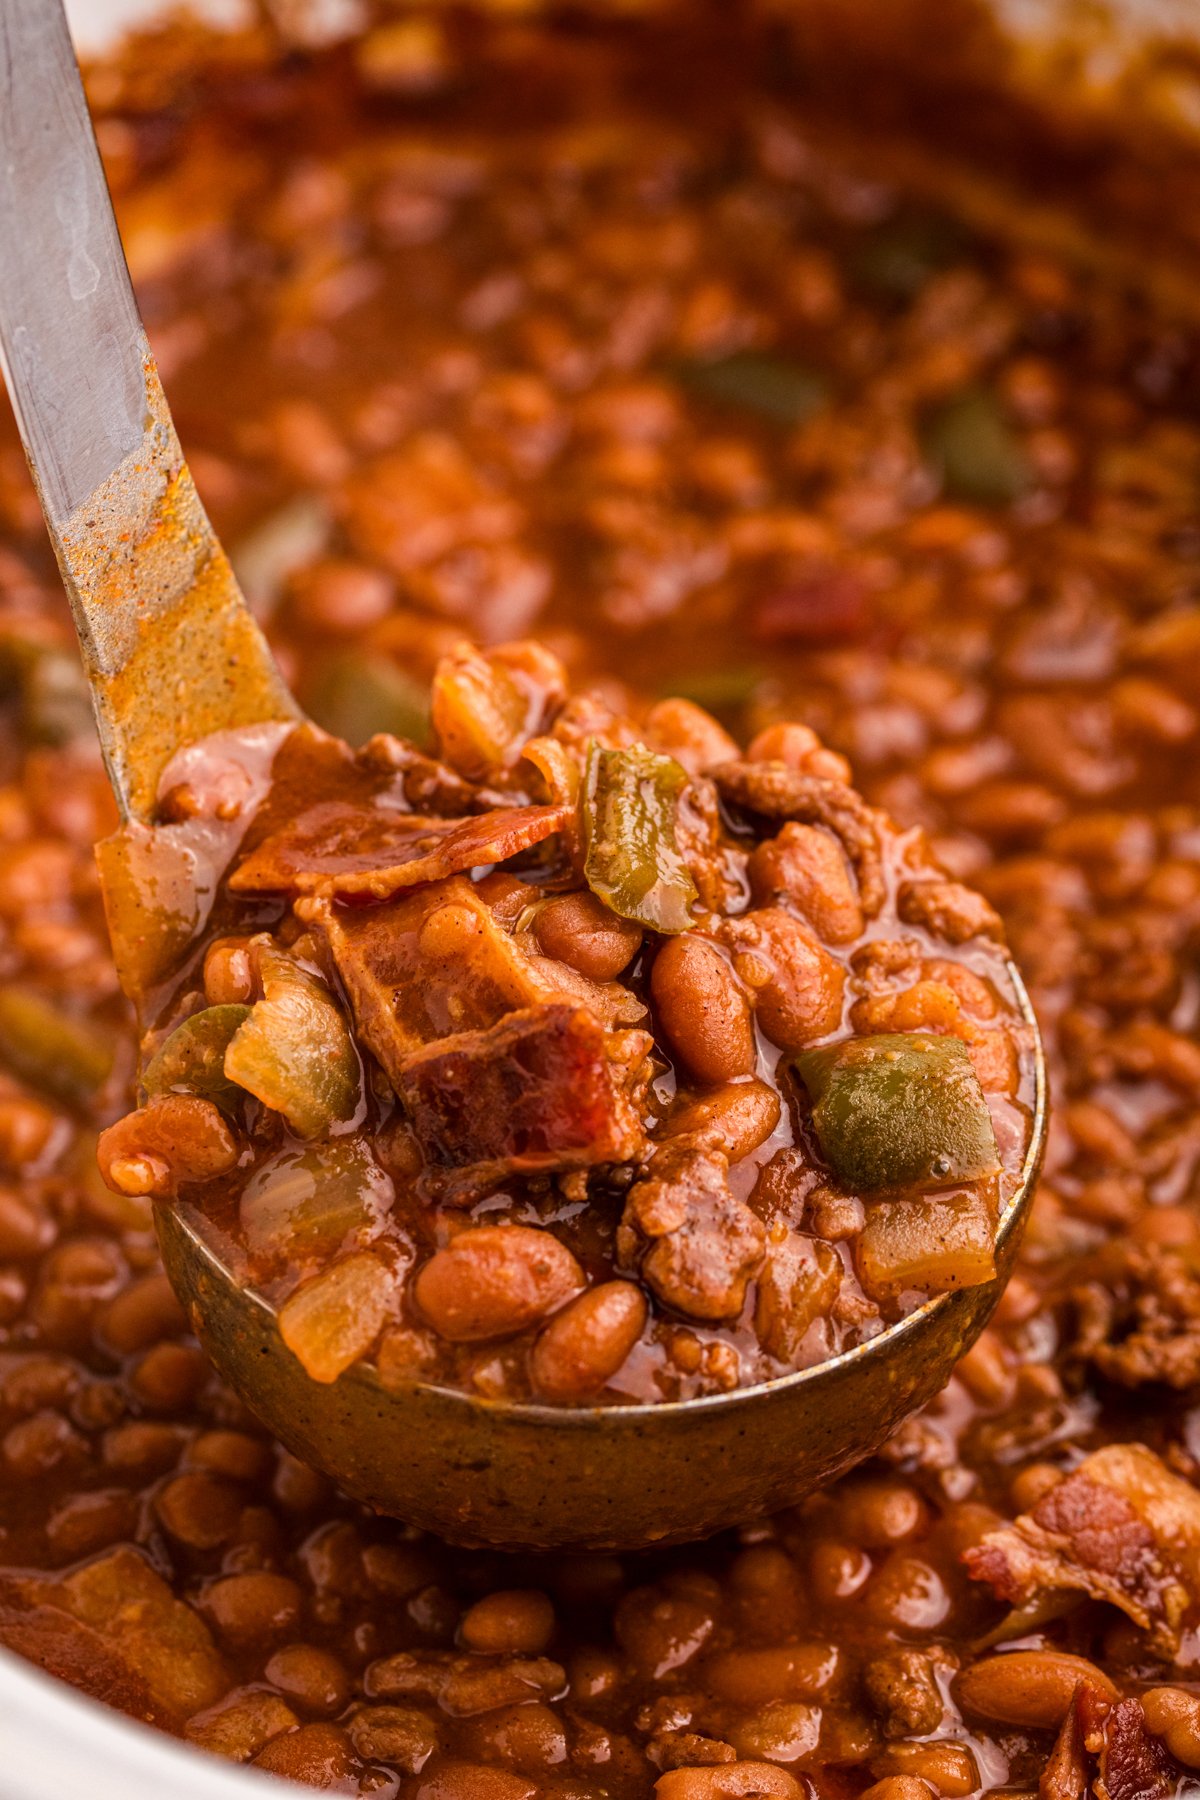 scooping out slow cooker land your man baked beans.